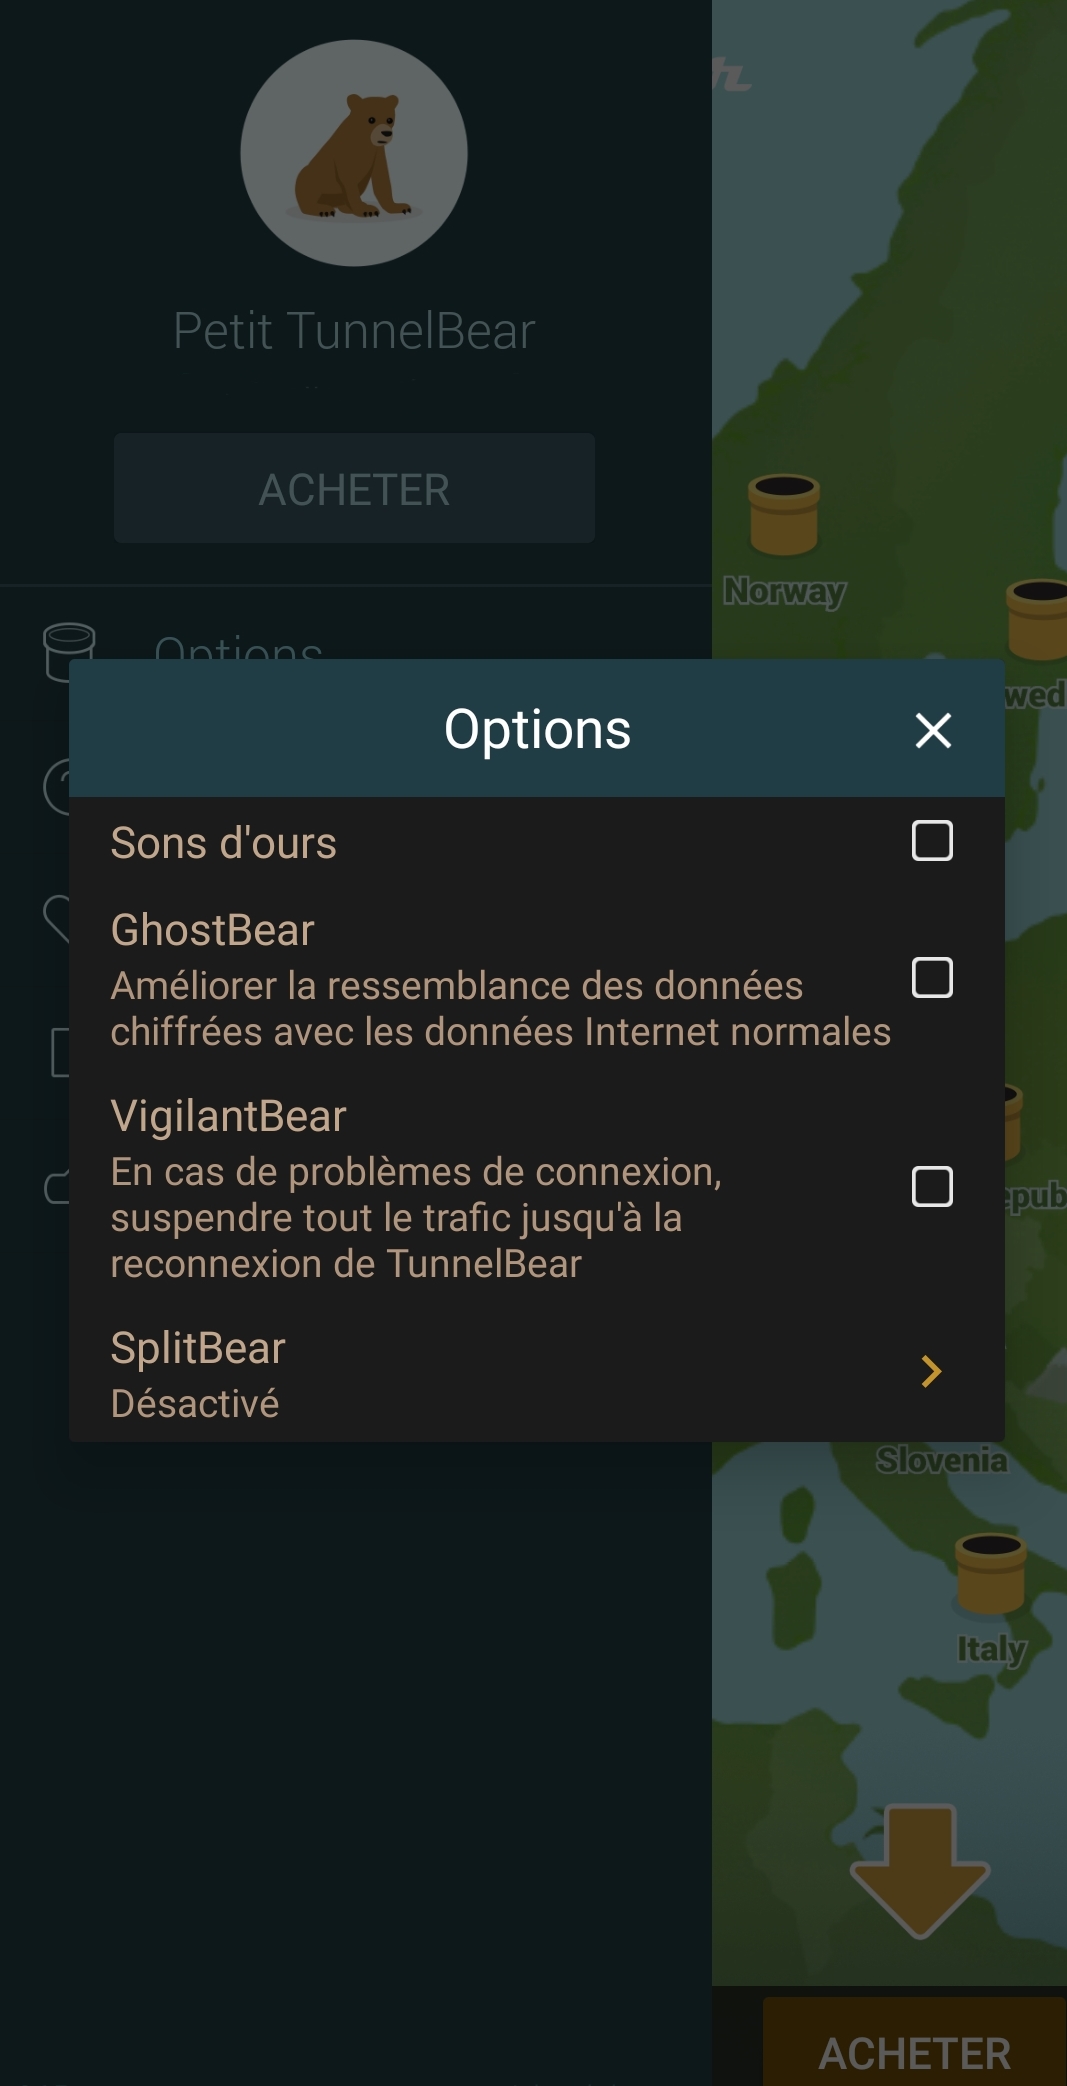 TunnelBear - Les options sur Android